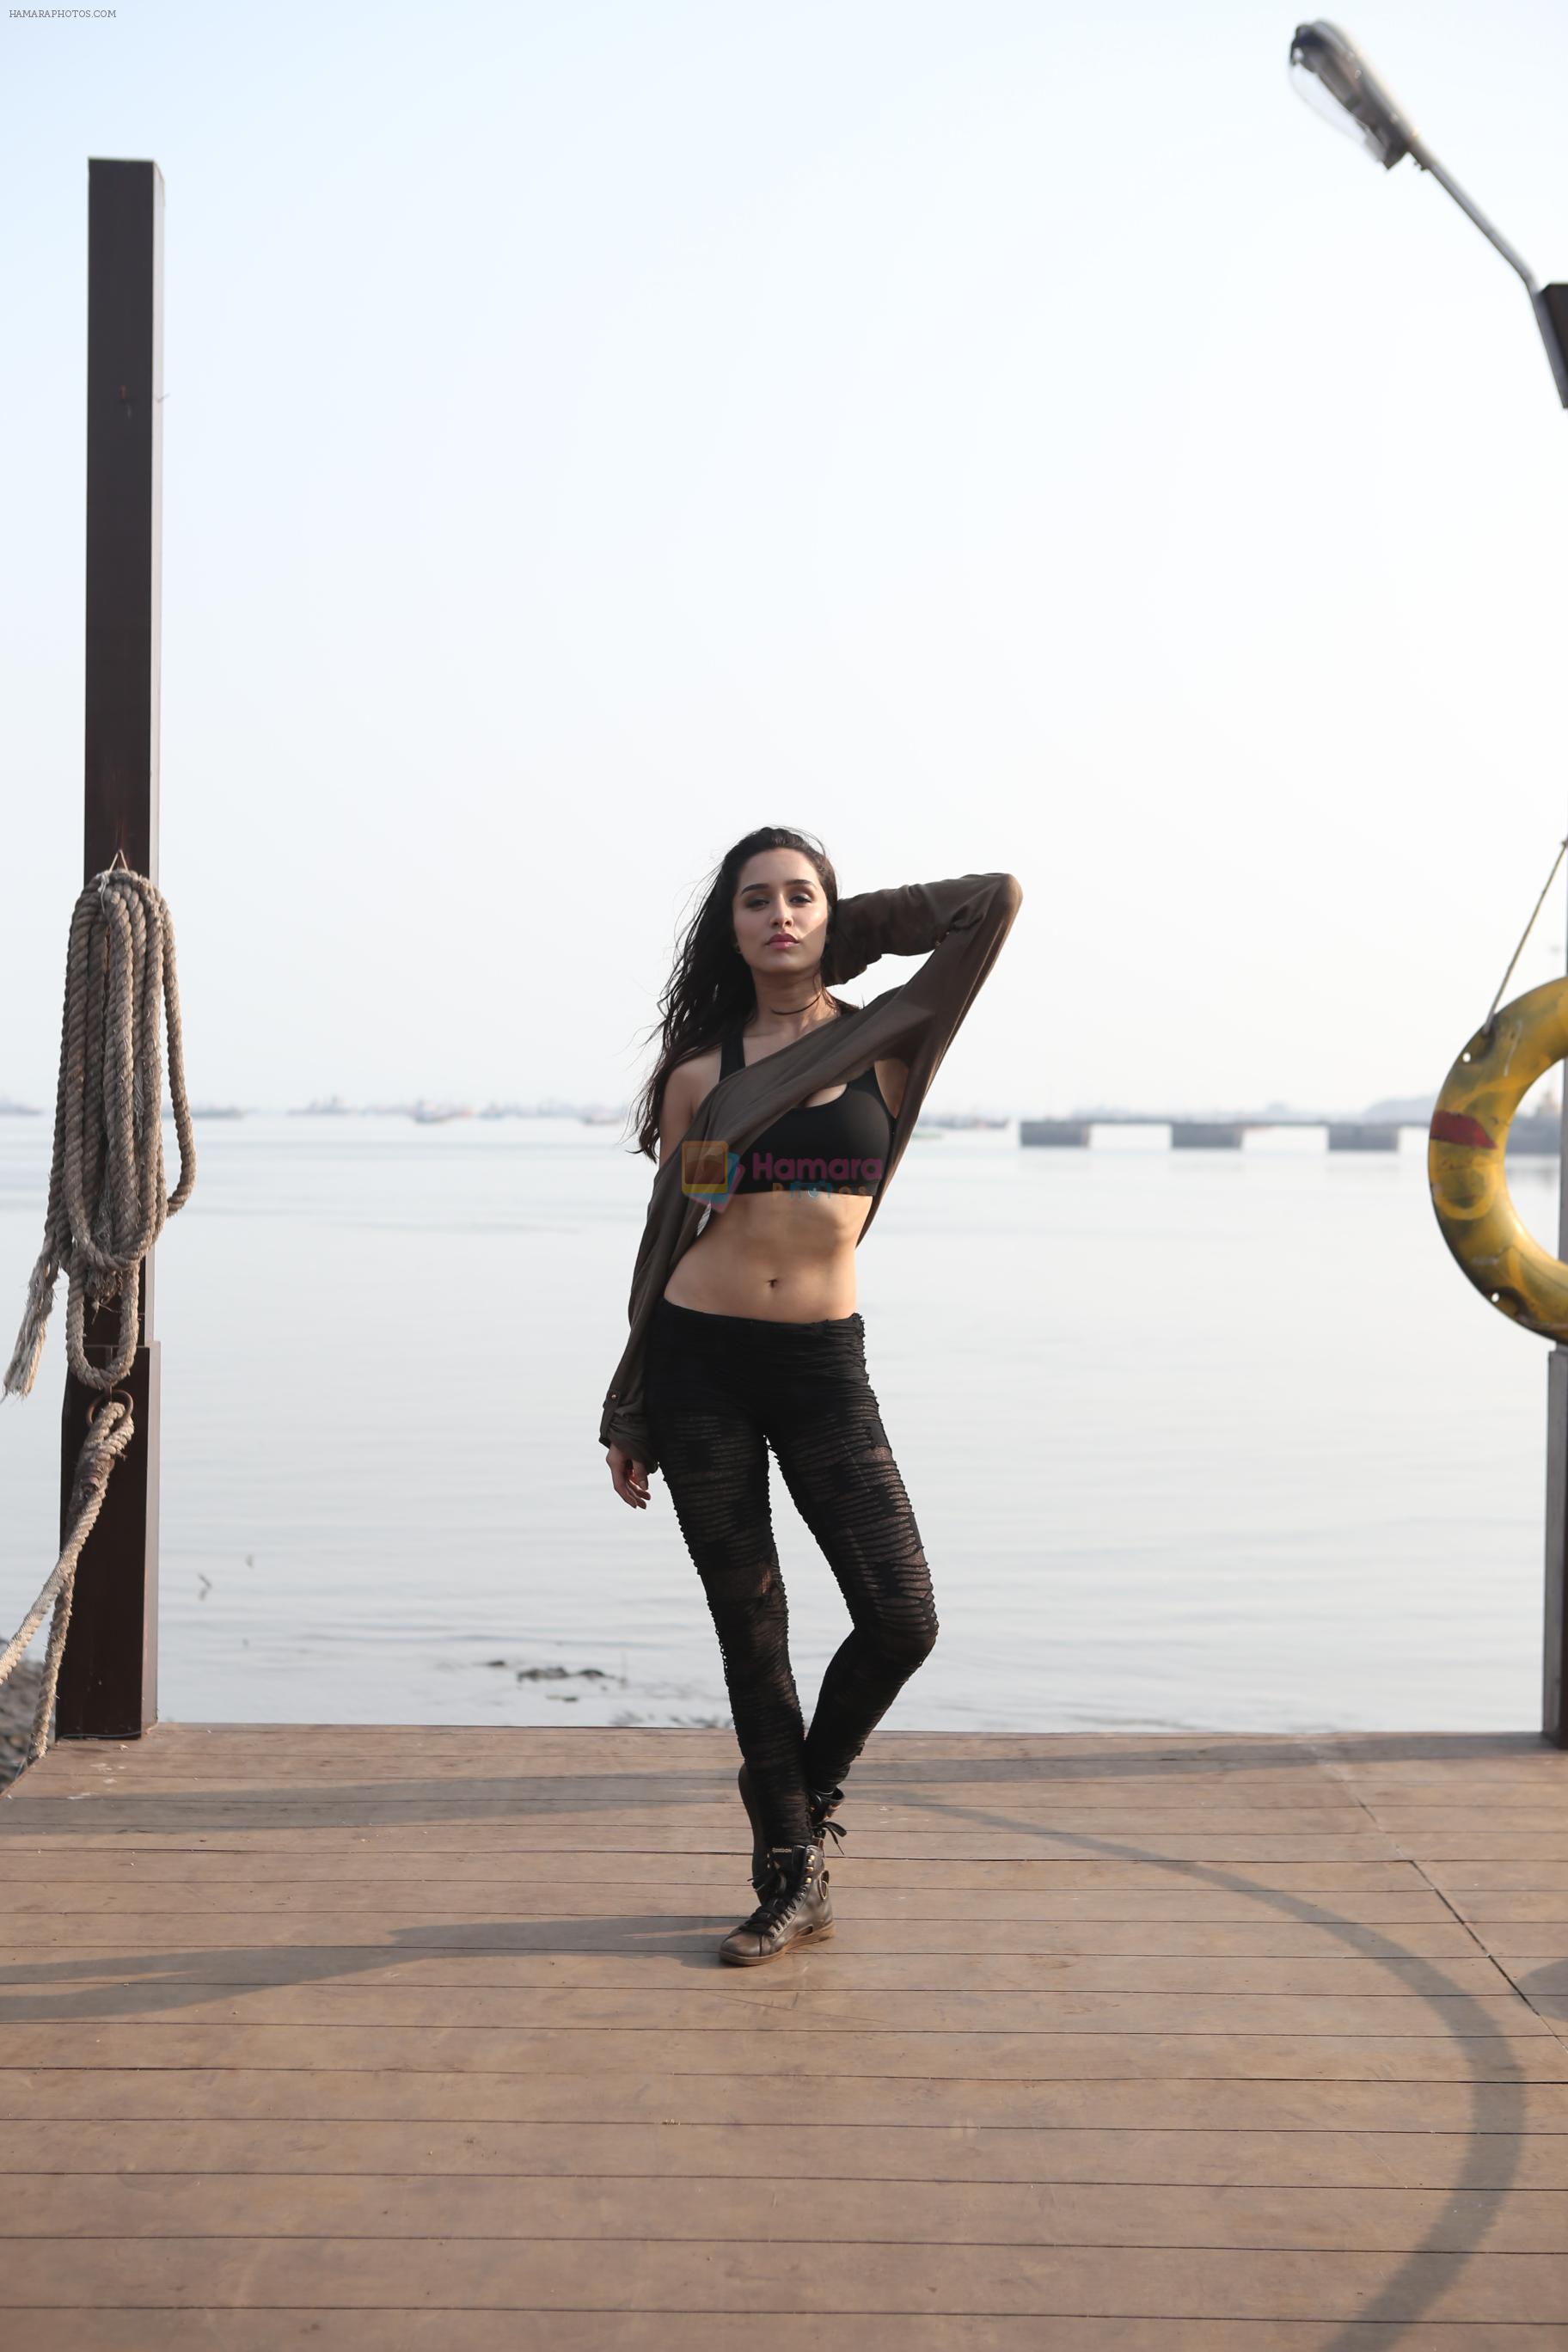 Shraddha Kapoor in the still from movie ABCD 2